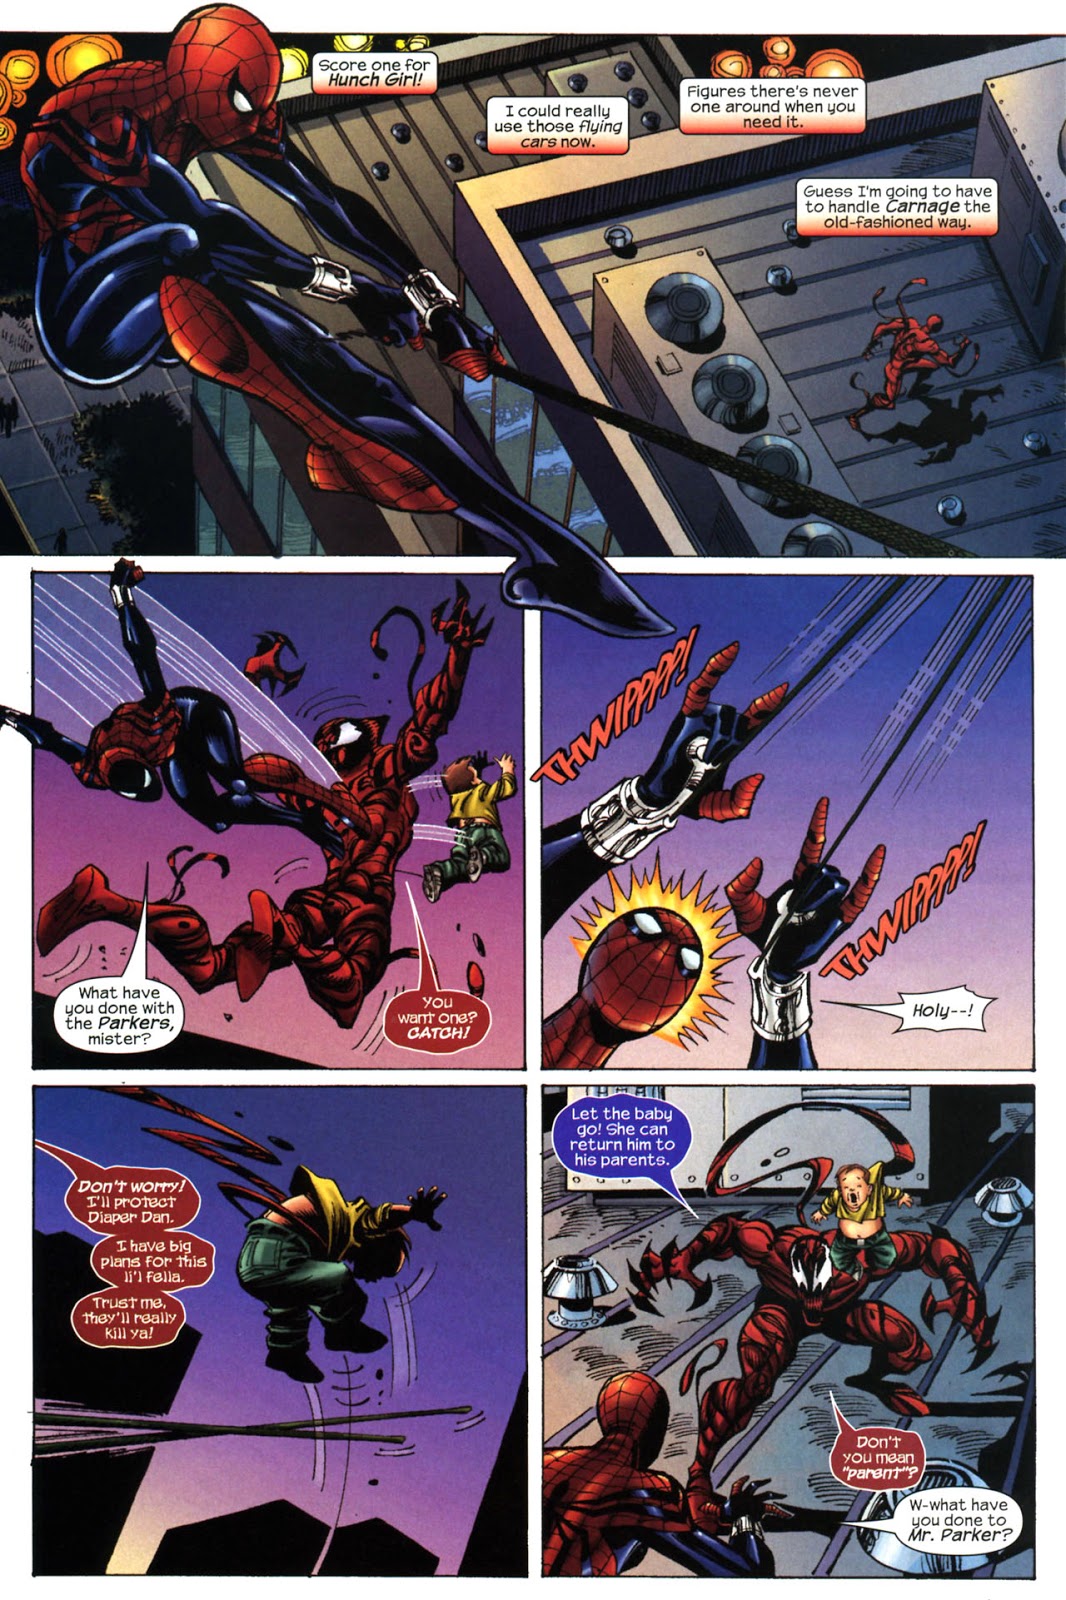 A Comic Odyssey: Carnage in the MC2